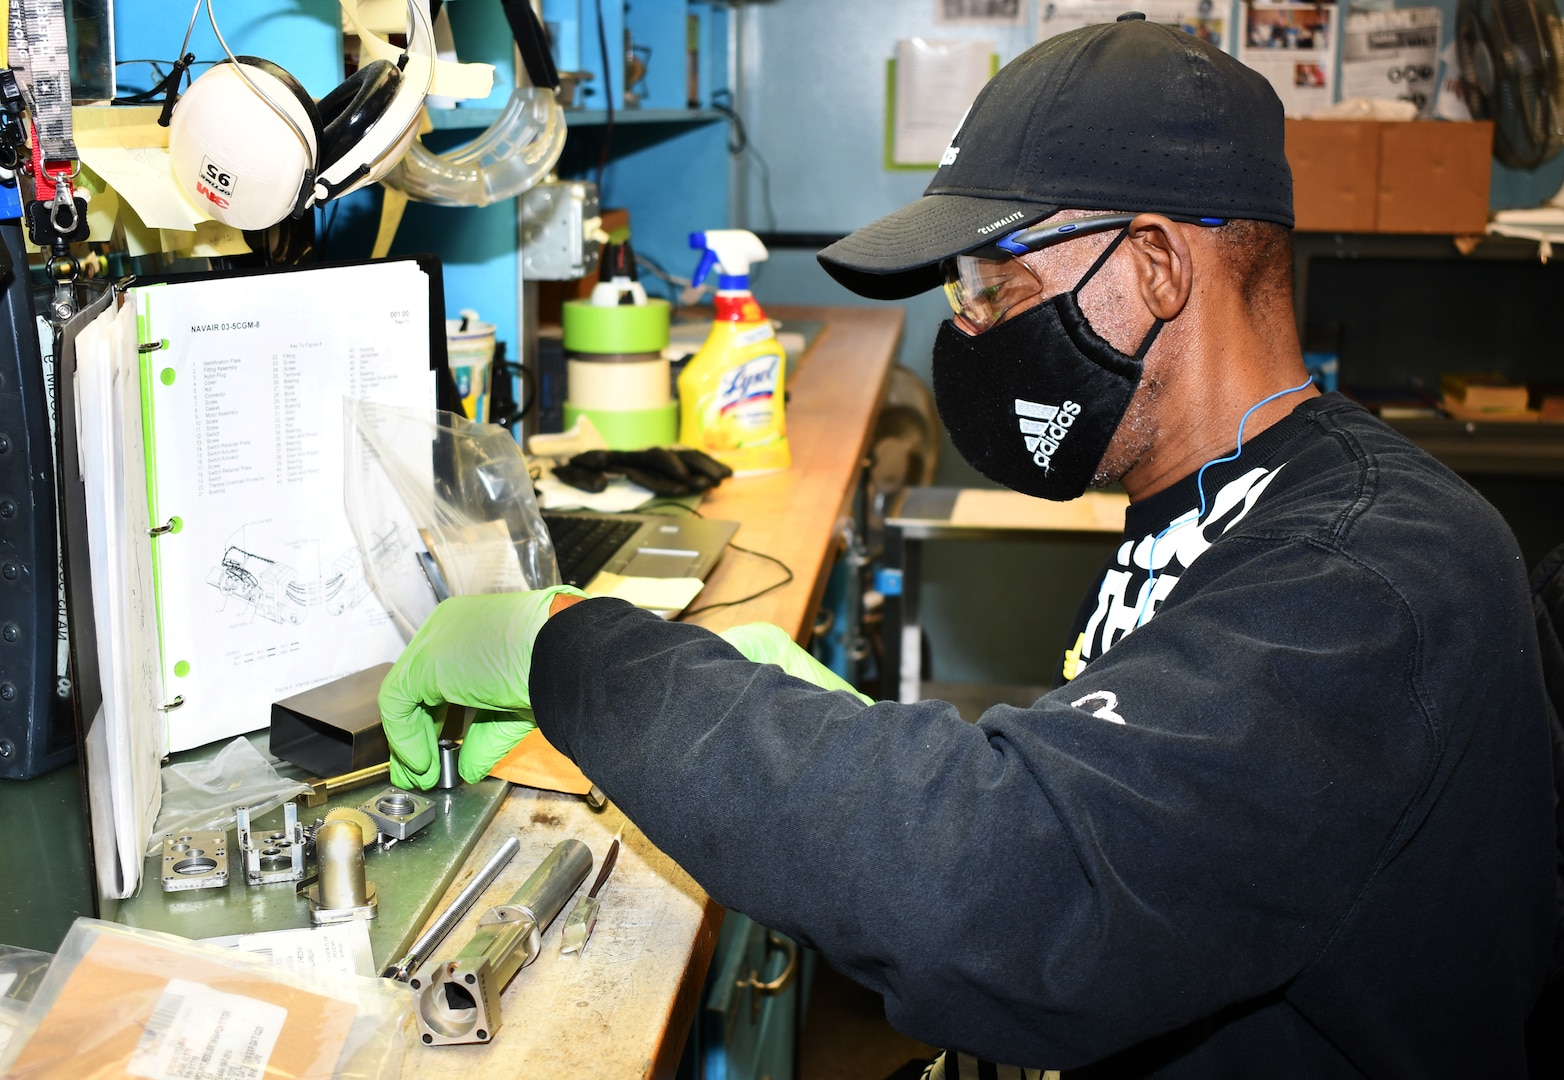 An electrical equipment repairer wearing gloves and a mask is seated at a workbench inventorying parts with reference materials in front of him.